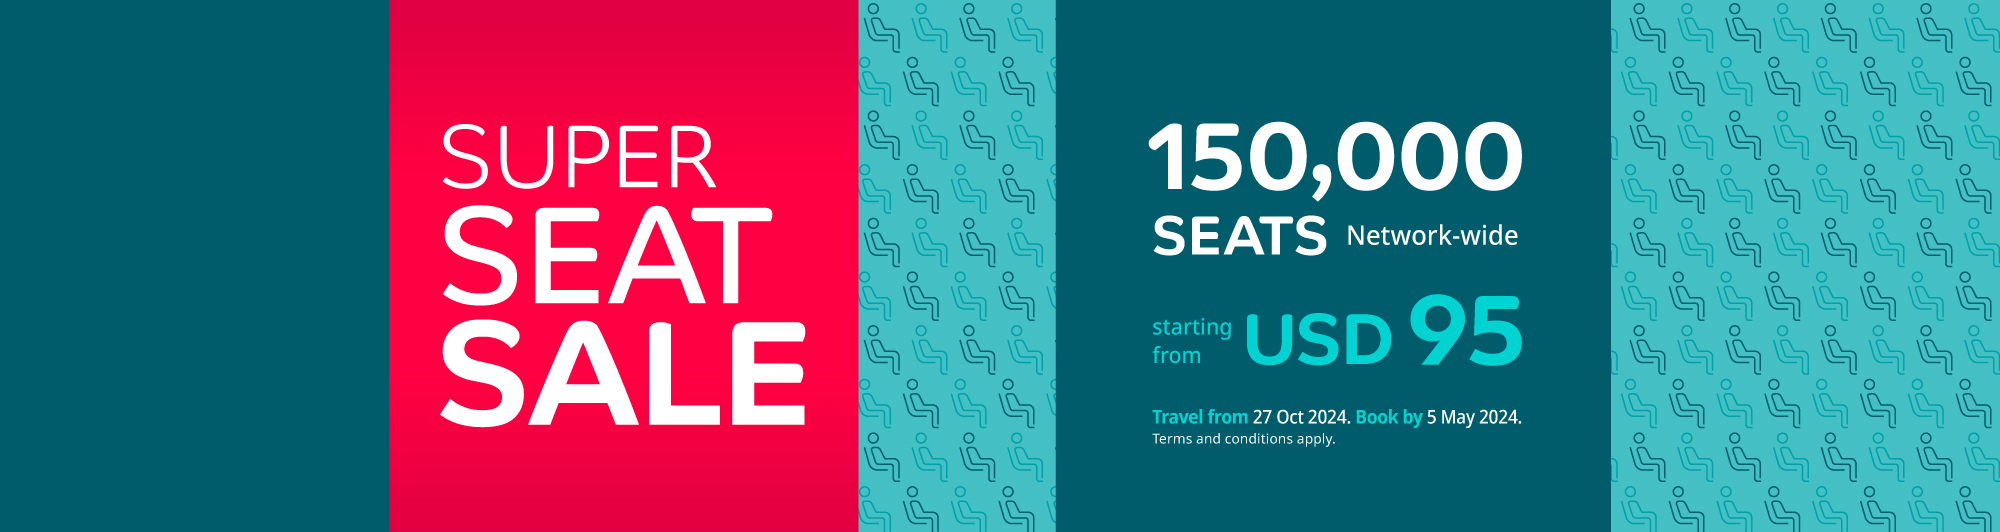 150,000 seats from AED 149